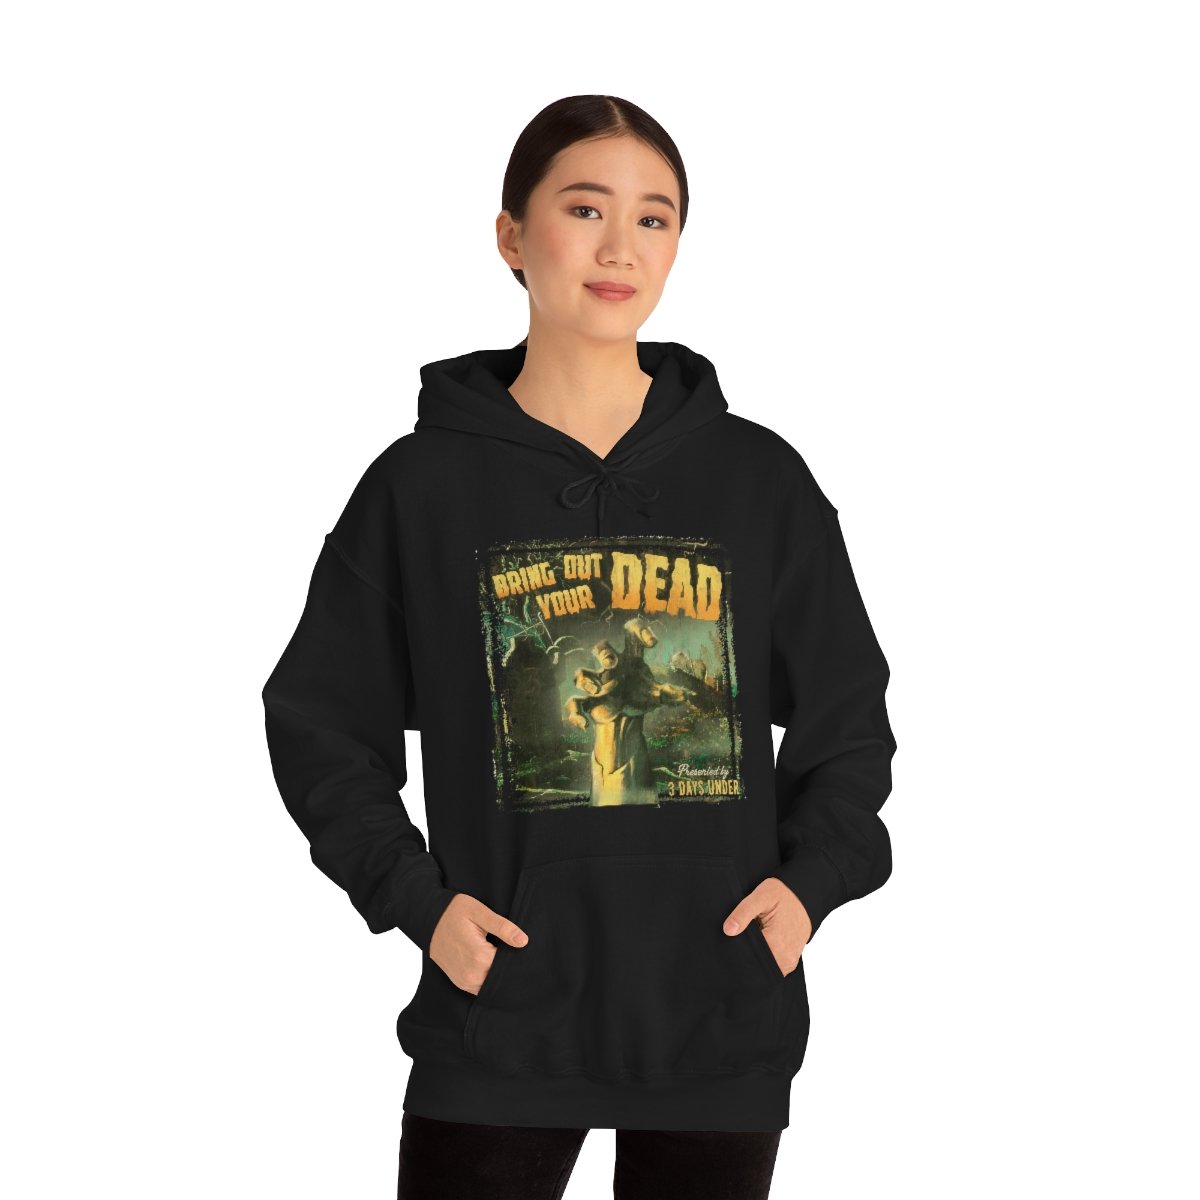 3 Days Under – Bring Out Your Dead Pullover Hooded Sweatshirt 185MD